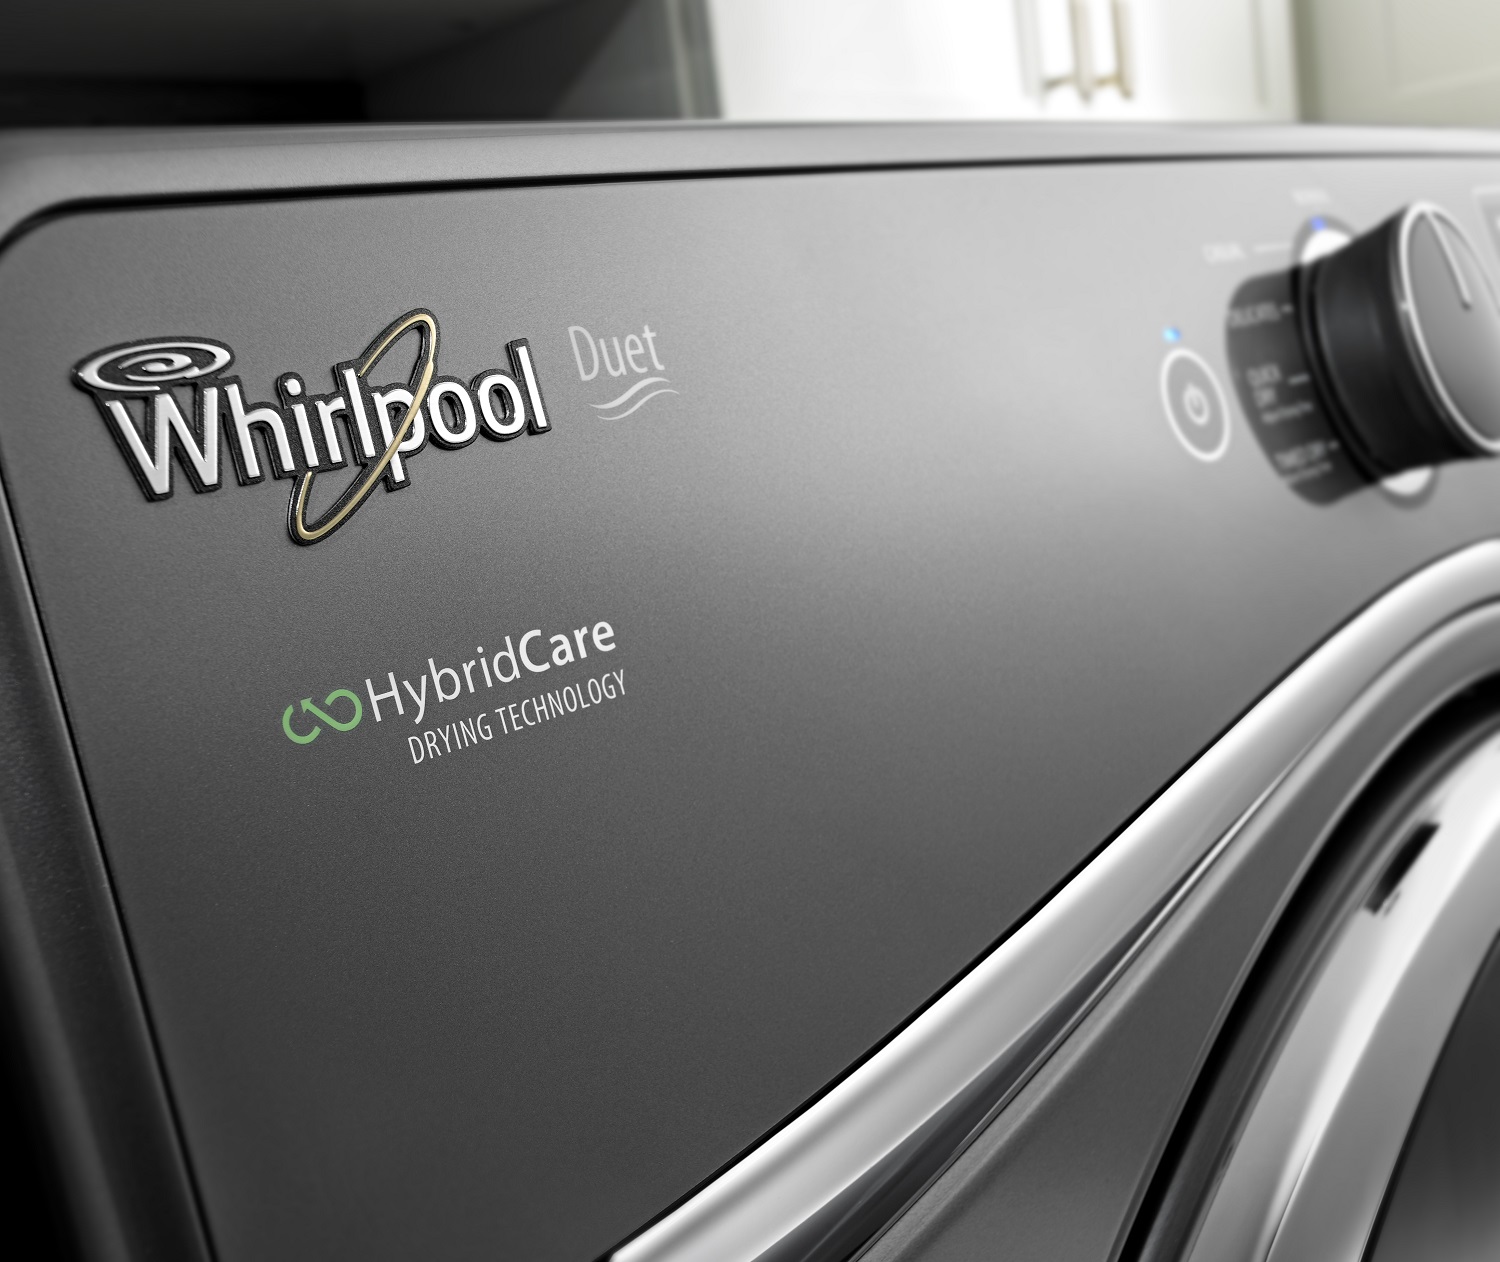 Introducing the Most Energy Efficient Dryer from Whirlpool Matus